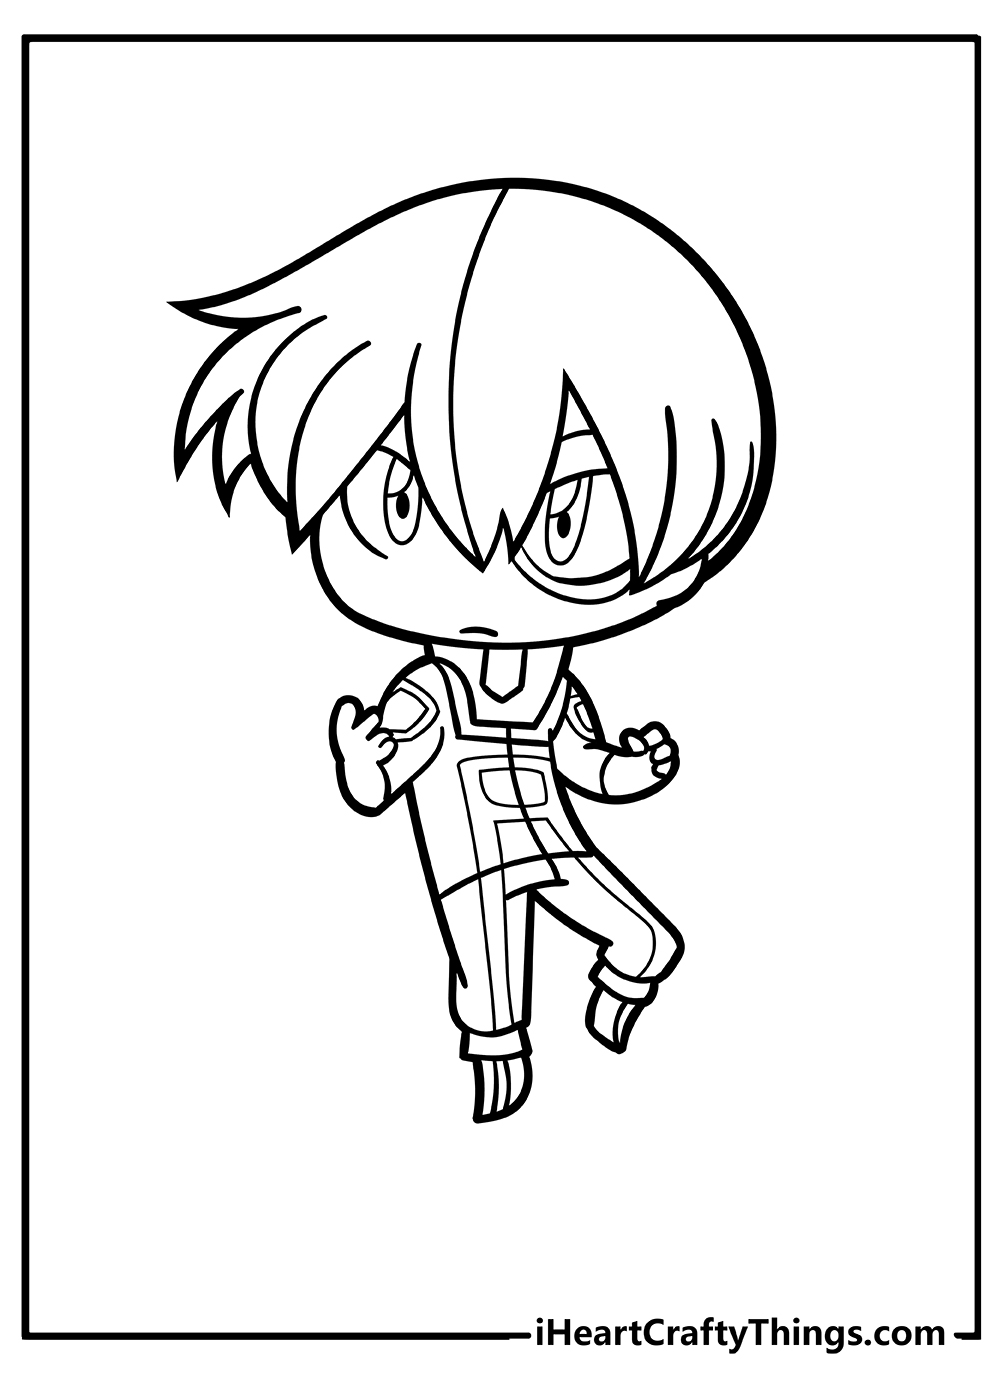 Printable Chibi Coloring Pages Updated 20 Ideas